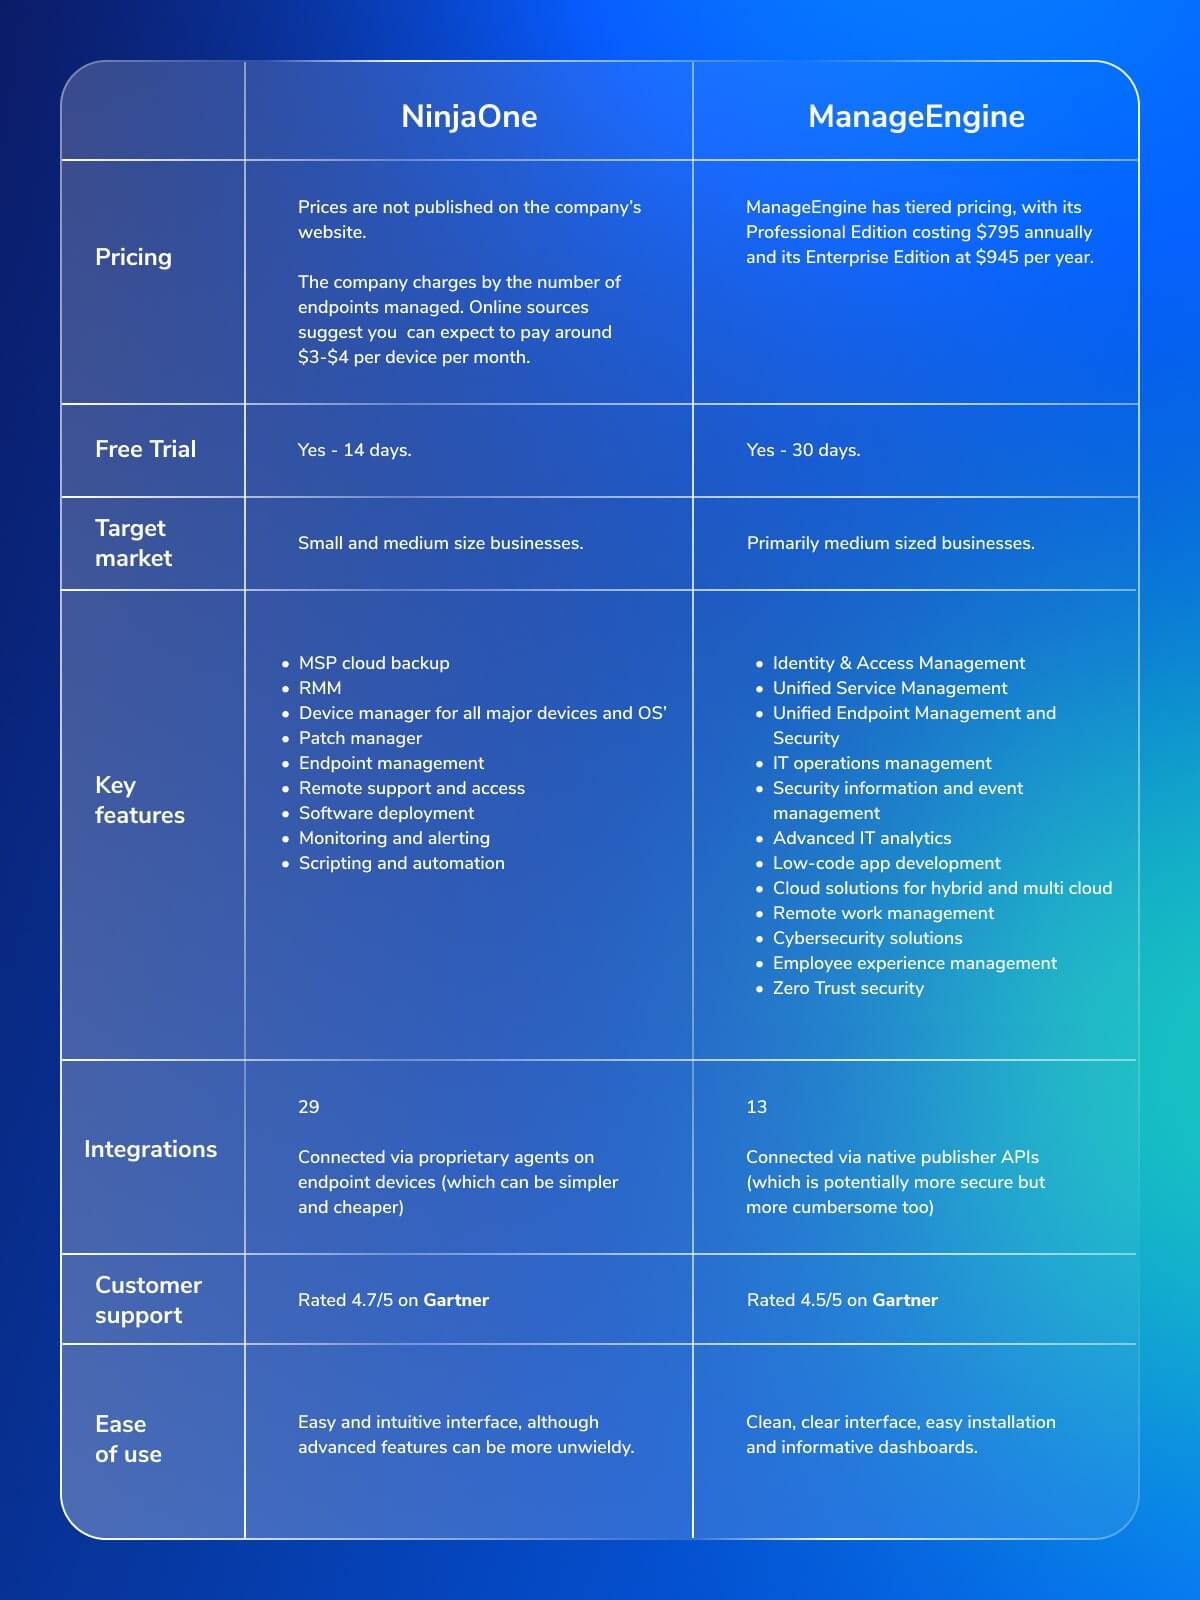 Comparison chart highlighting the features, pricing, and customer support of NinjaOne and ManageEngine IT management solutions. The chart details the key aspects like pricing models, trial periods, features, integrations, and customer ratings for both software platforms.